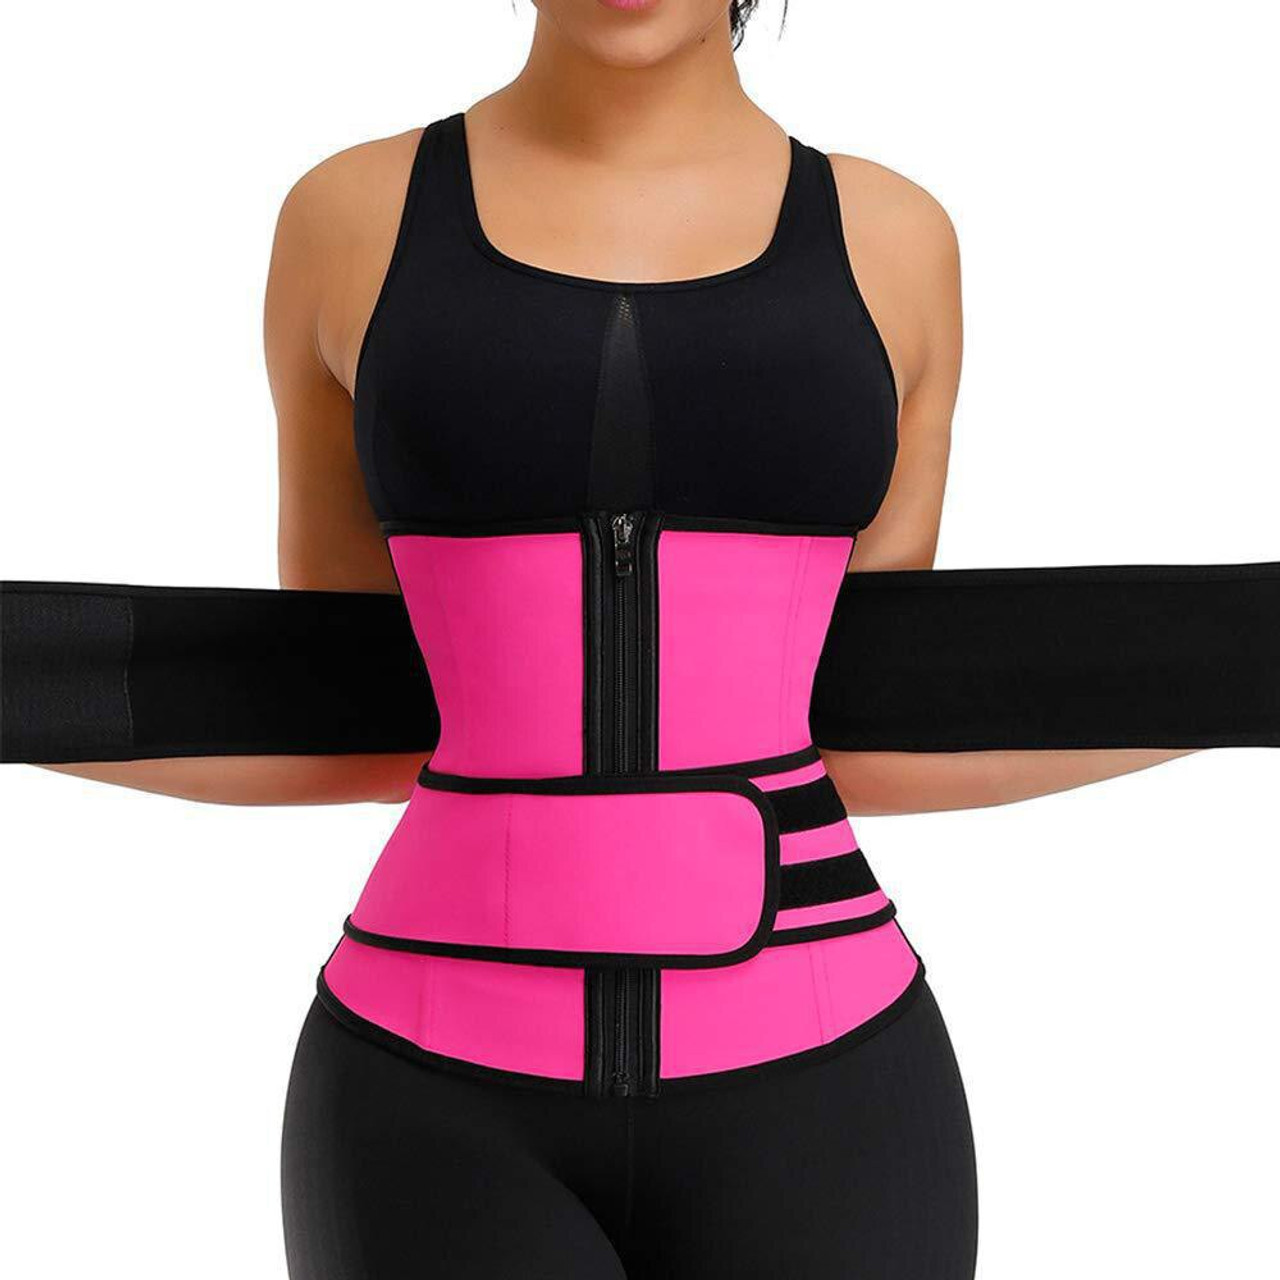 Waist Trainers for sale in Walmer, Eastern Cape, South Africa